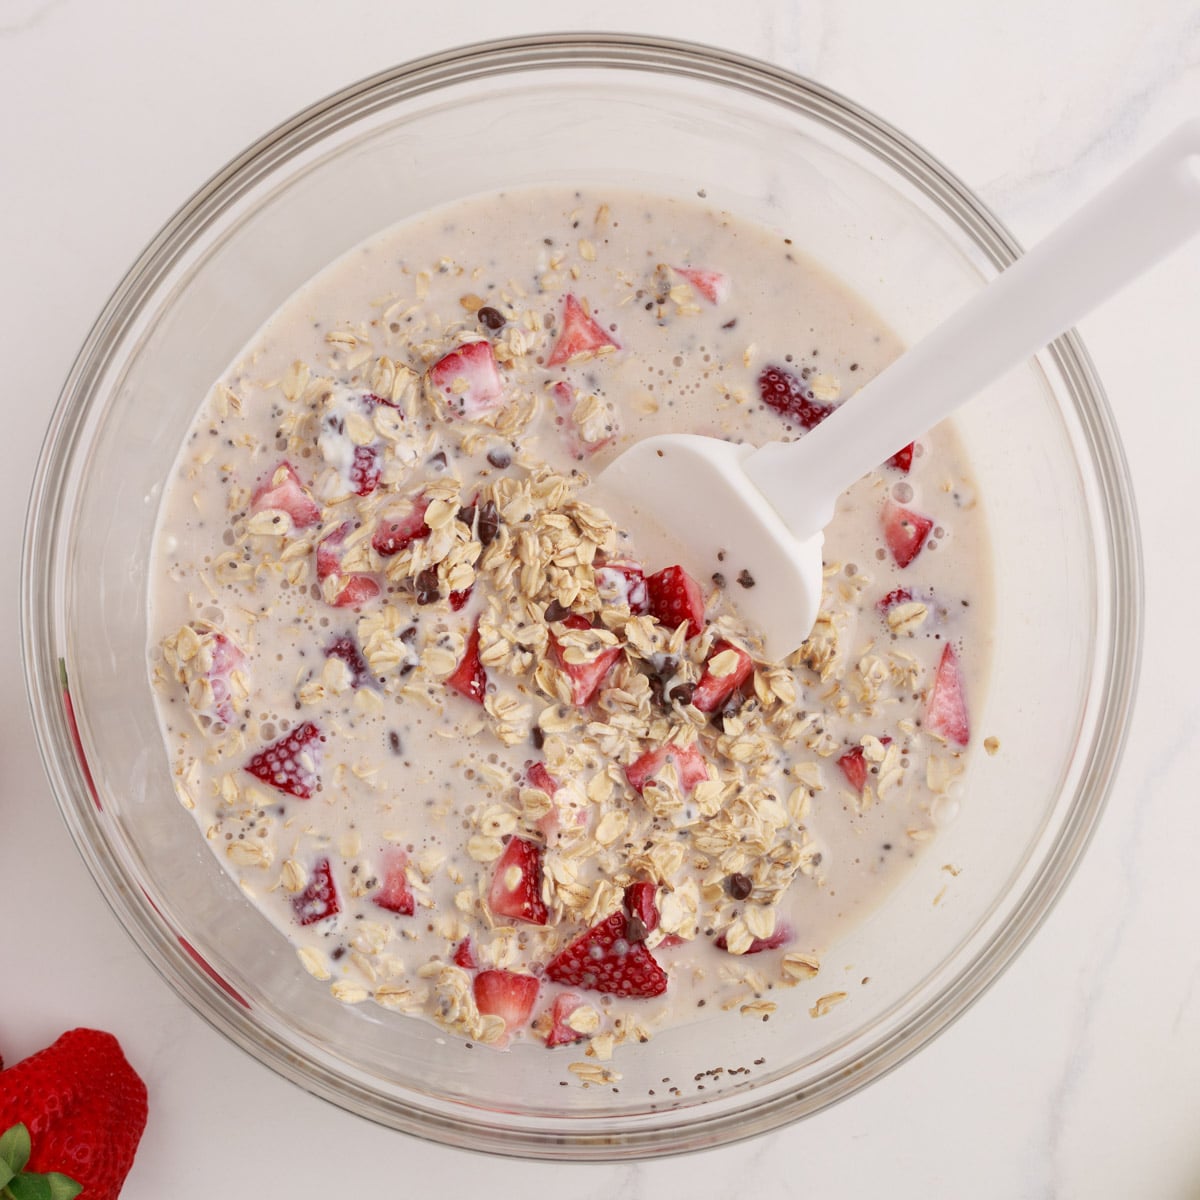 ingredients for strawberry banana overnight oats in a bowl